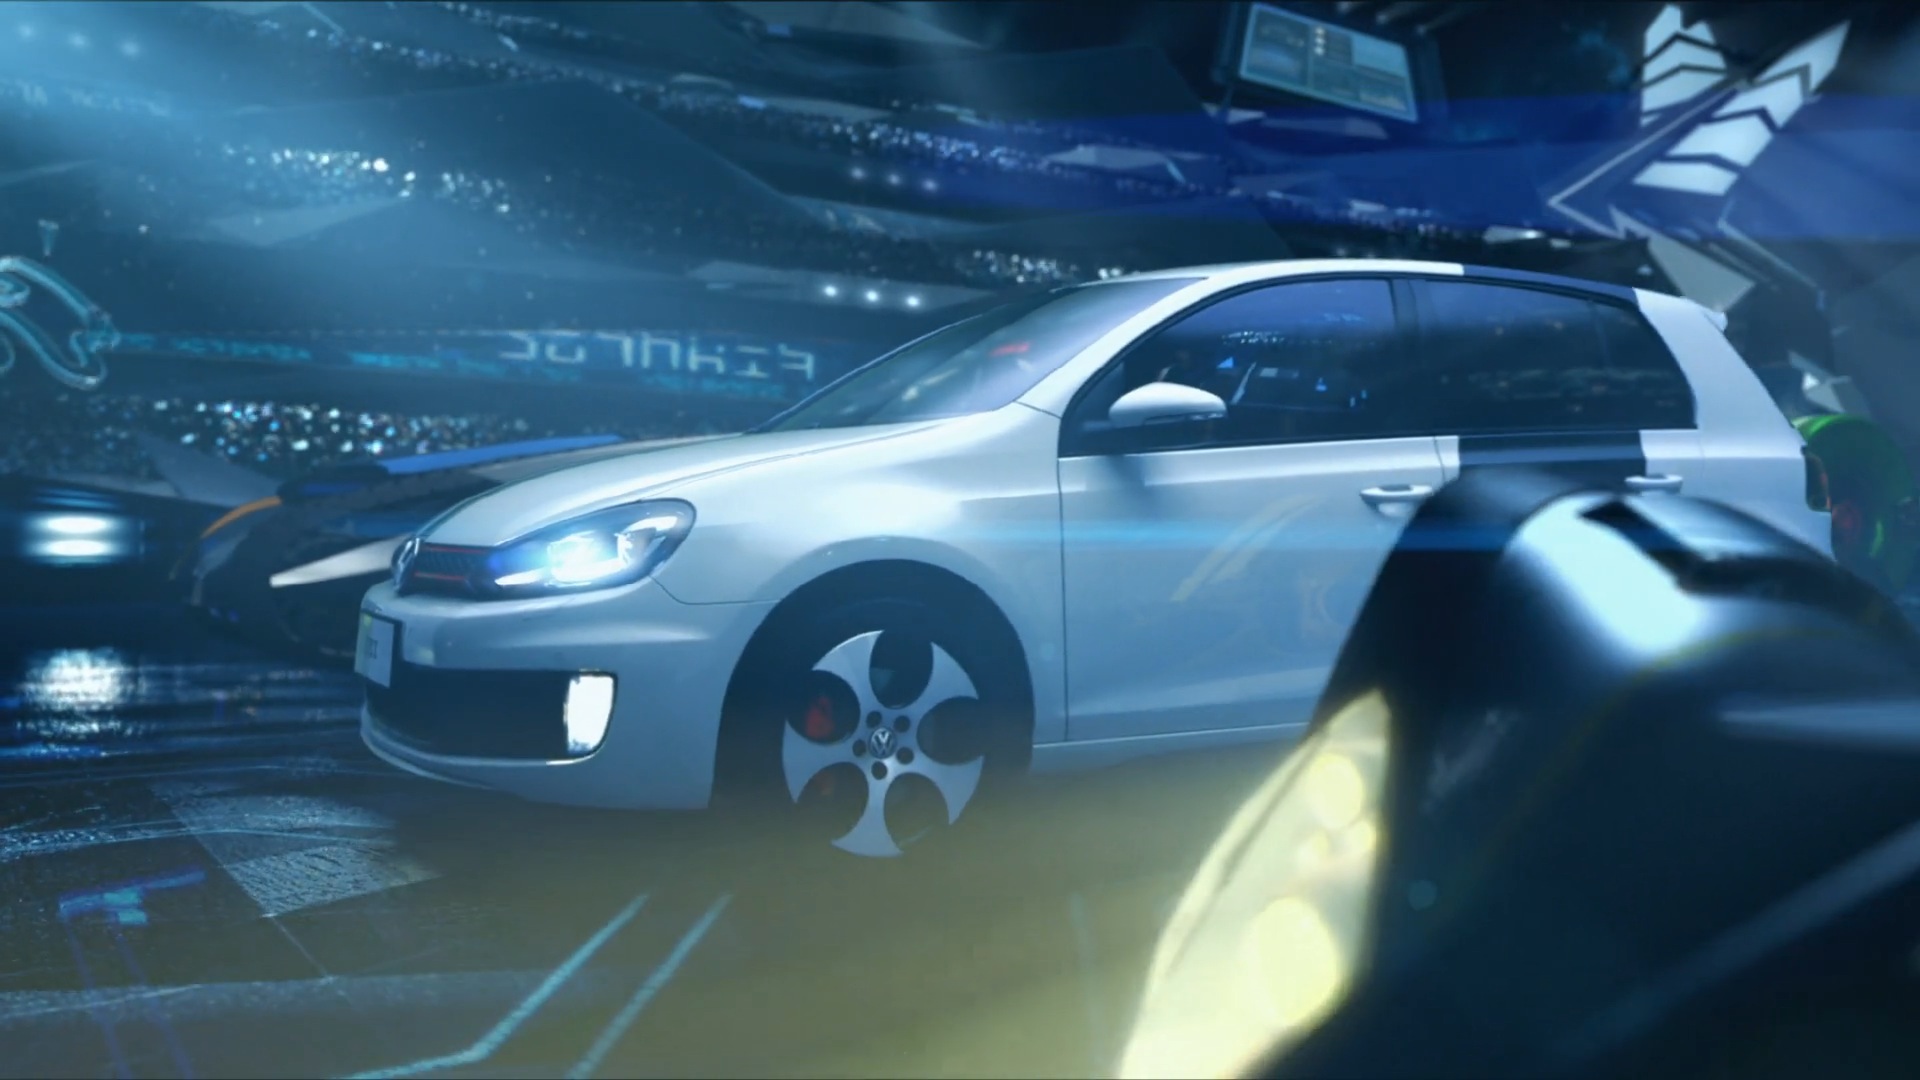 VW Golf GTI - Out Of This World